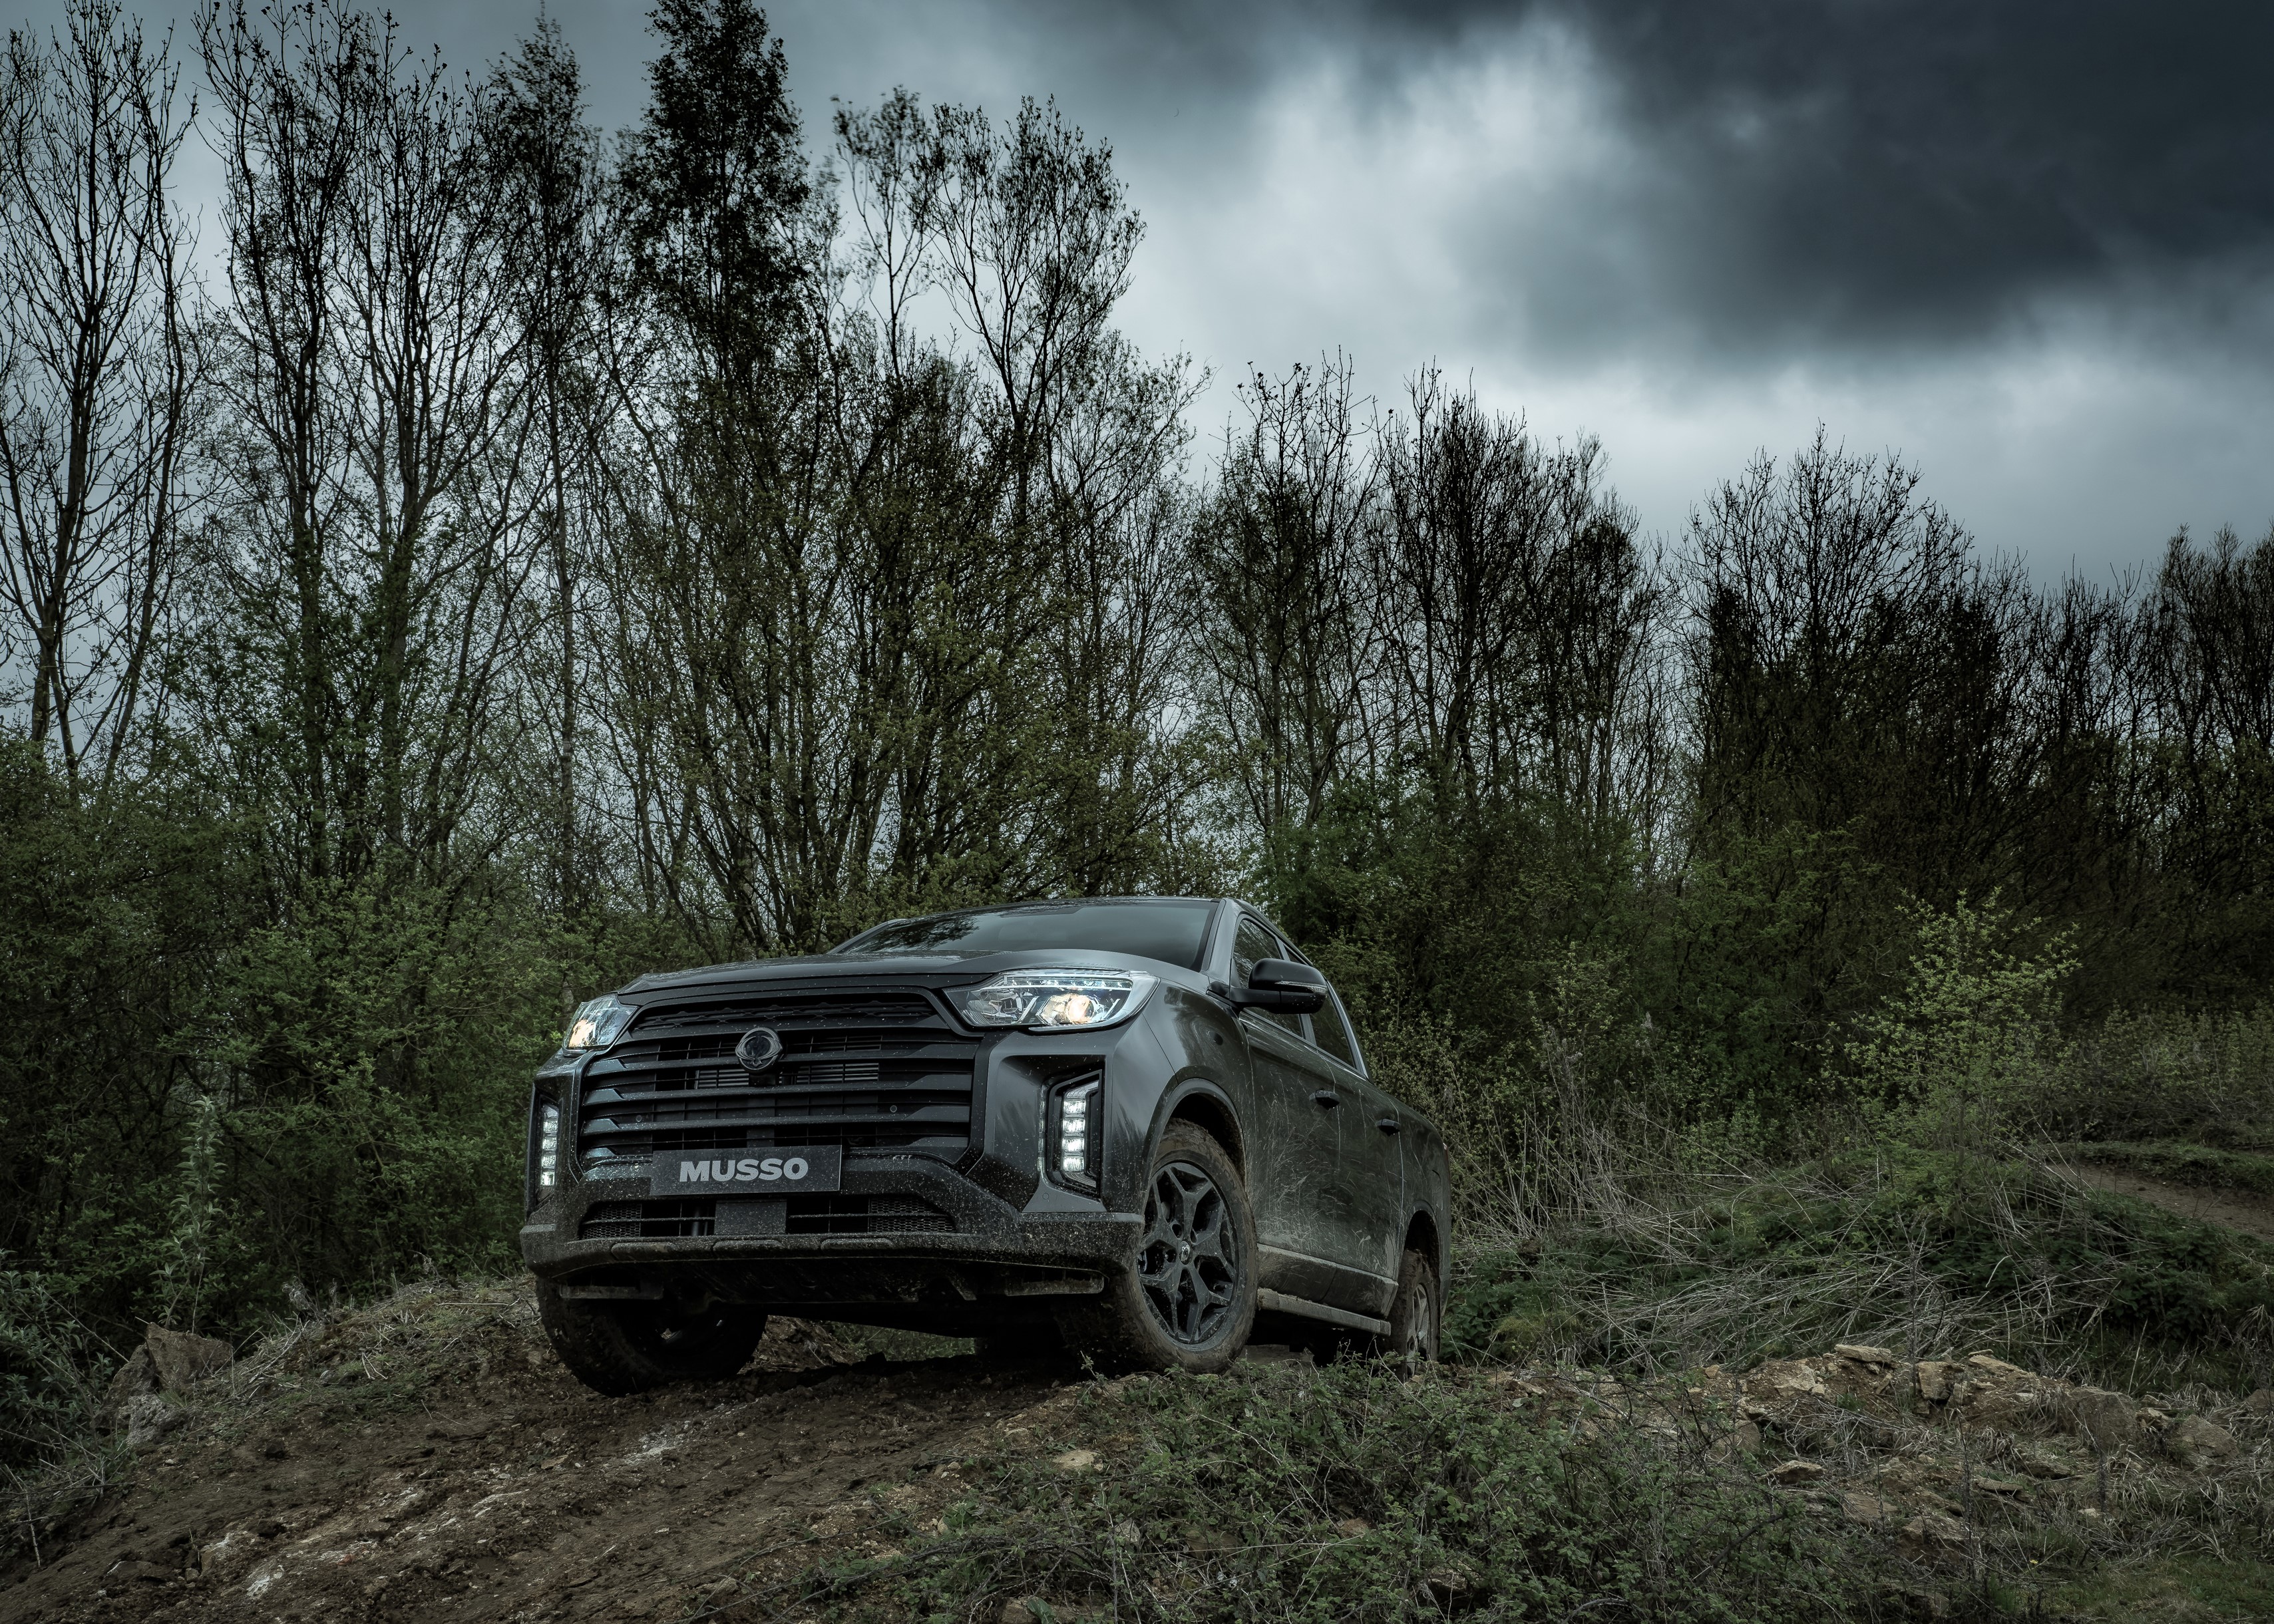 SsangYong Musso off roading in a woodland area